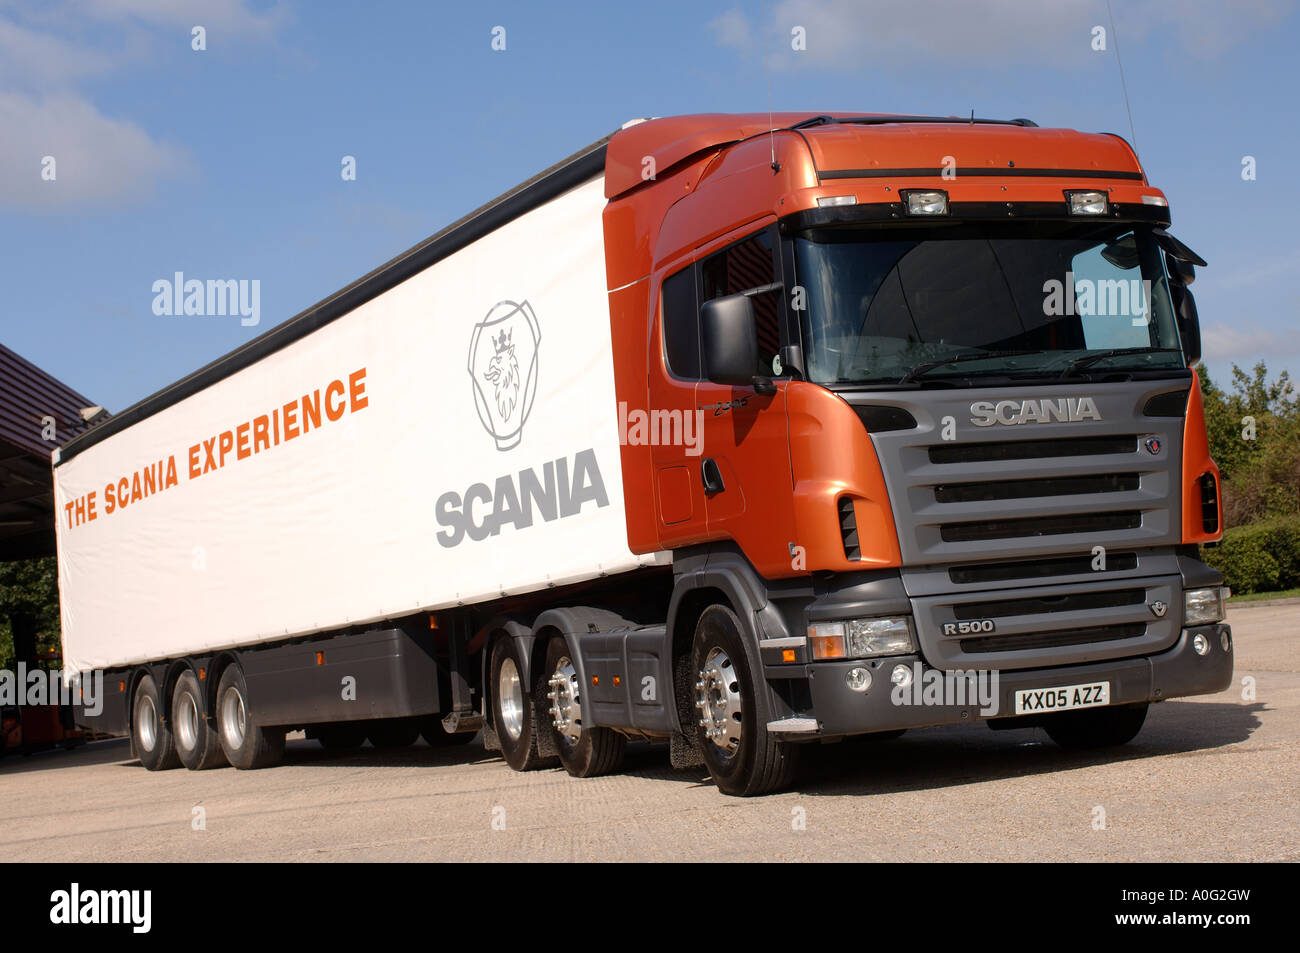 scania r500 v8 articulated lorry at a distribution centre in the uk Stock Photo